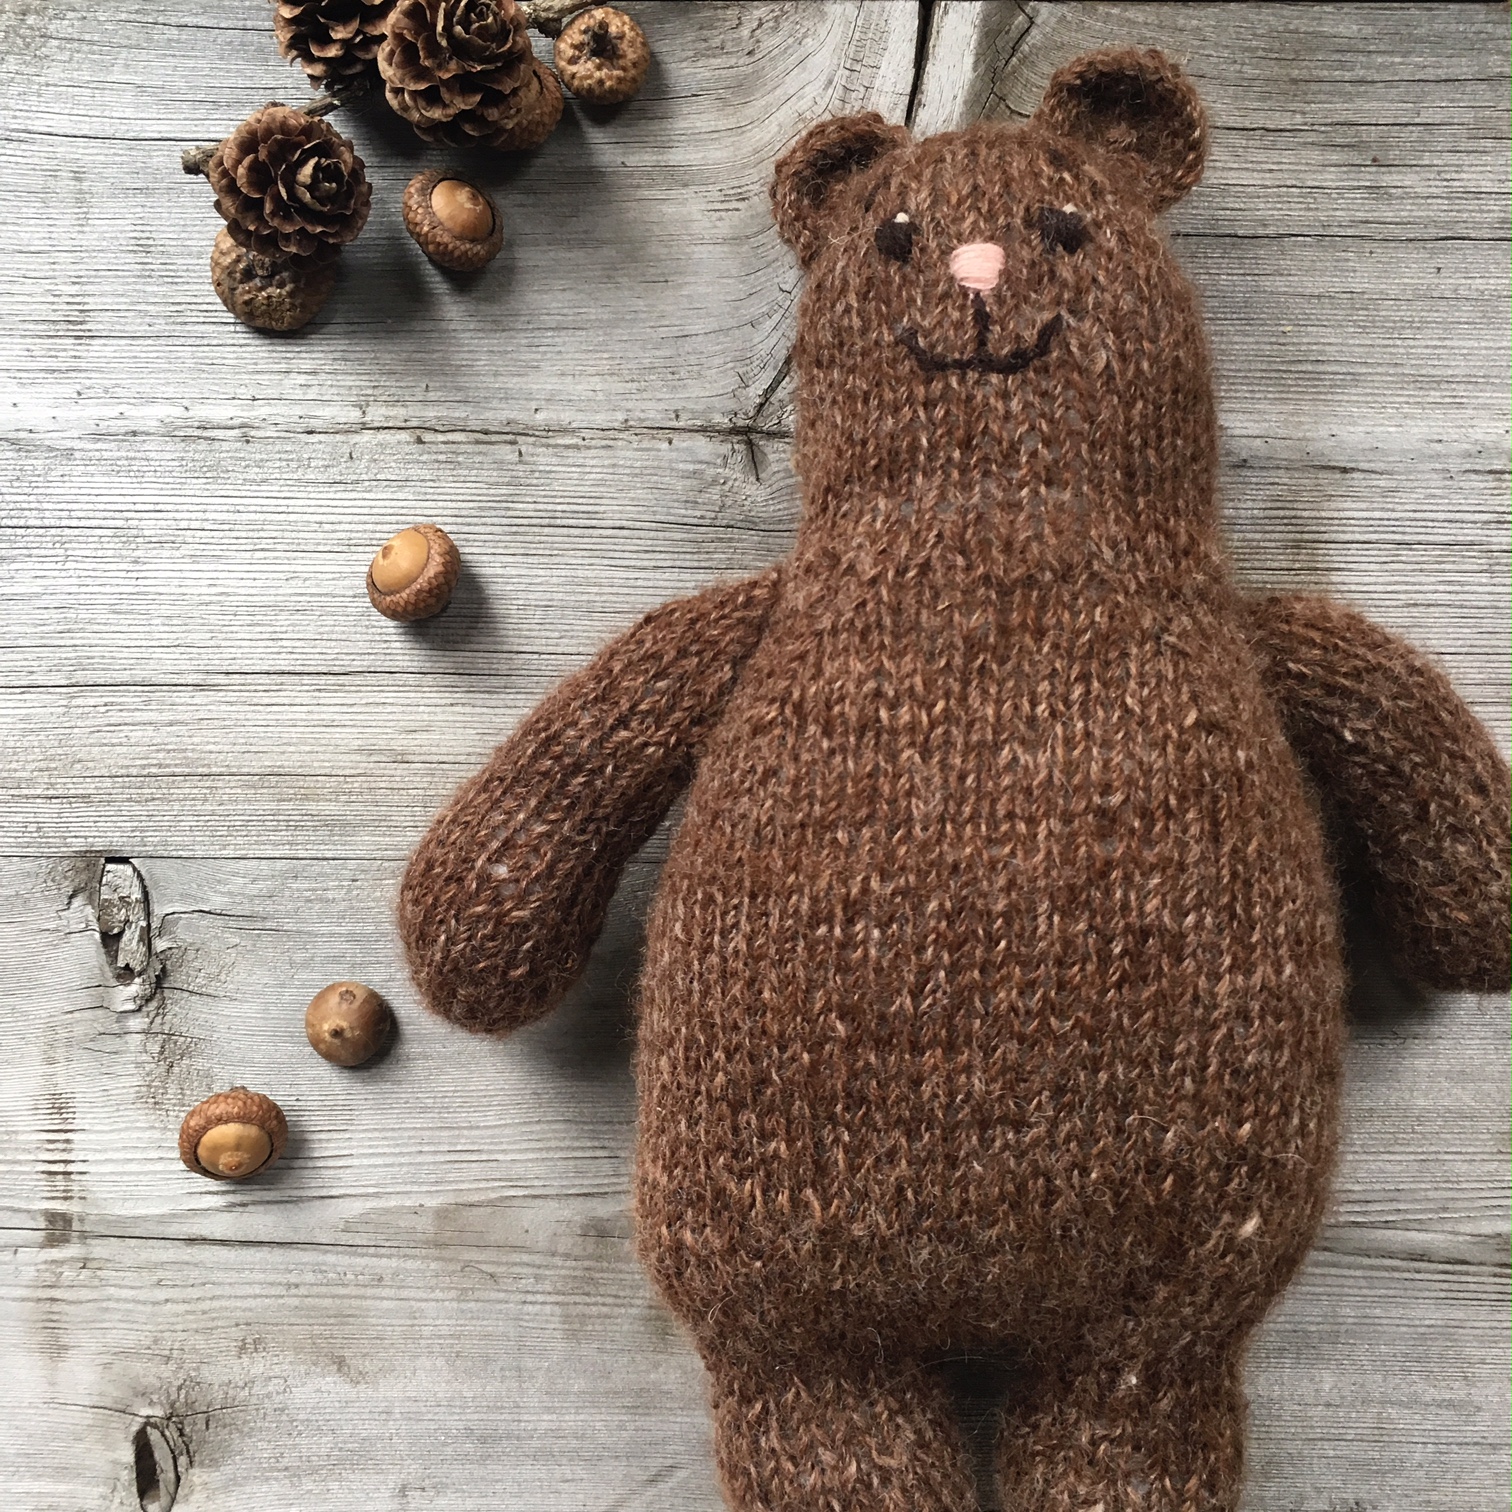 Otso Free Pattern – Our Christmas gift to you!